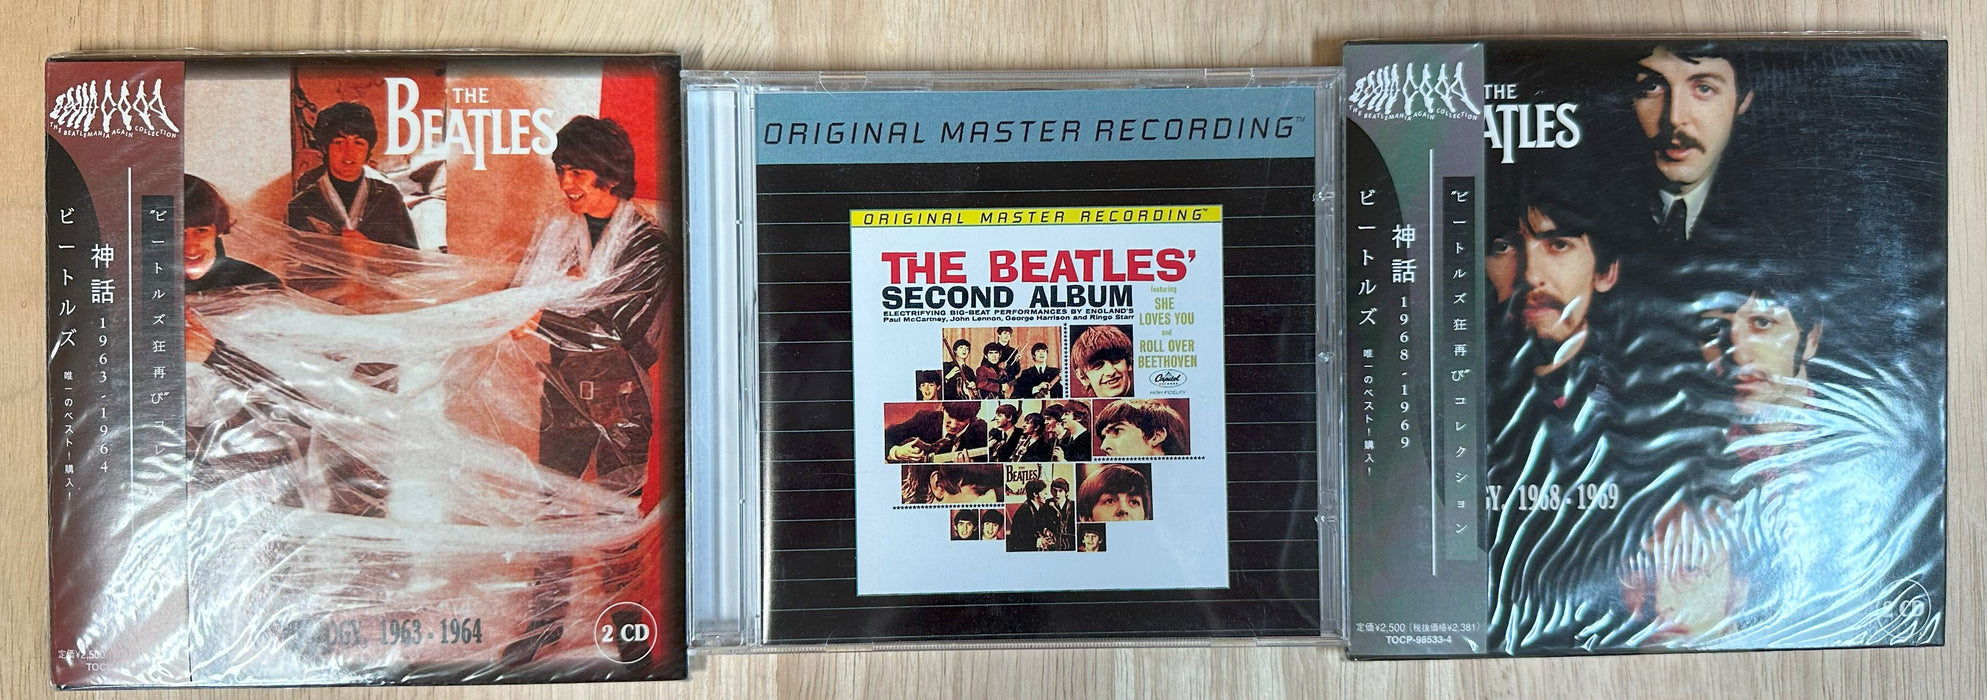 The Beatles - CD Library #6